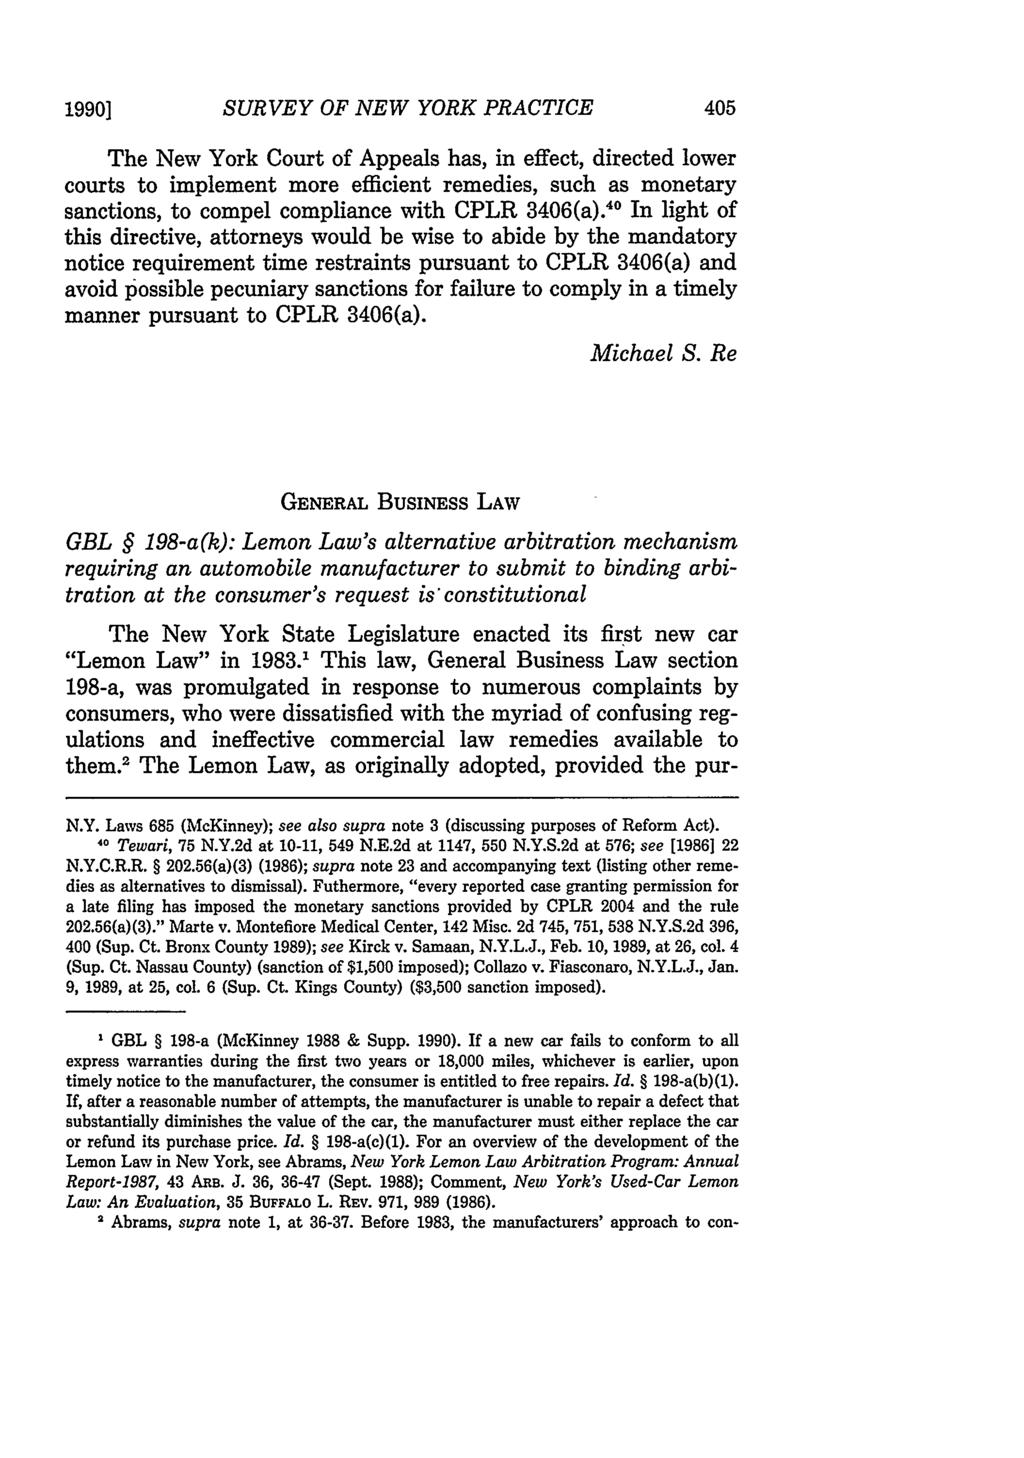 1990] SURVEY OF NEW YORK PRACTICE The New York Court of Appeals has, in effect, directed lower courts to implement more efficient remedies, such as monetary sanctions, to compel compliance with CPLR